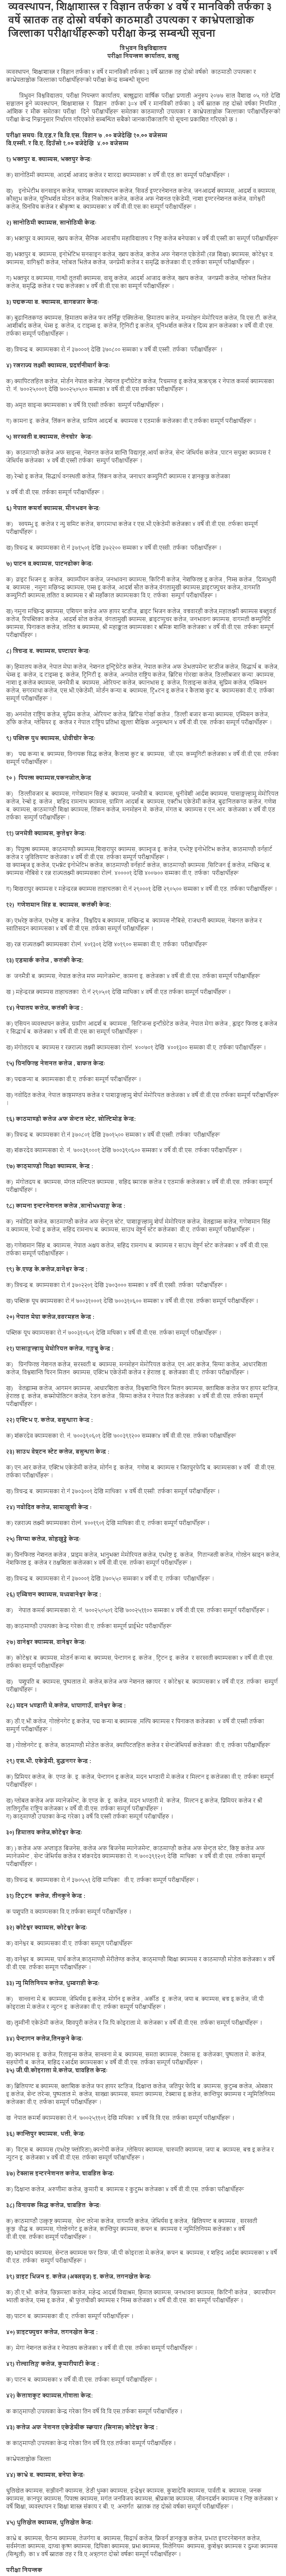 BBS, BA, B.Ed. and B.Sc. (3-4 Years) 2nd Year Regular and Partial Exam Center (Kathmandu Valley and Kavre)